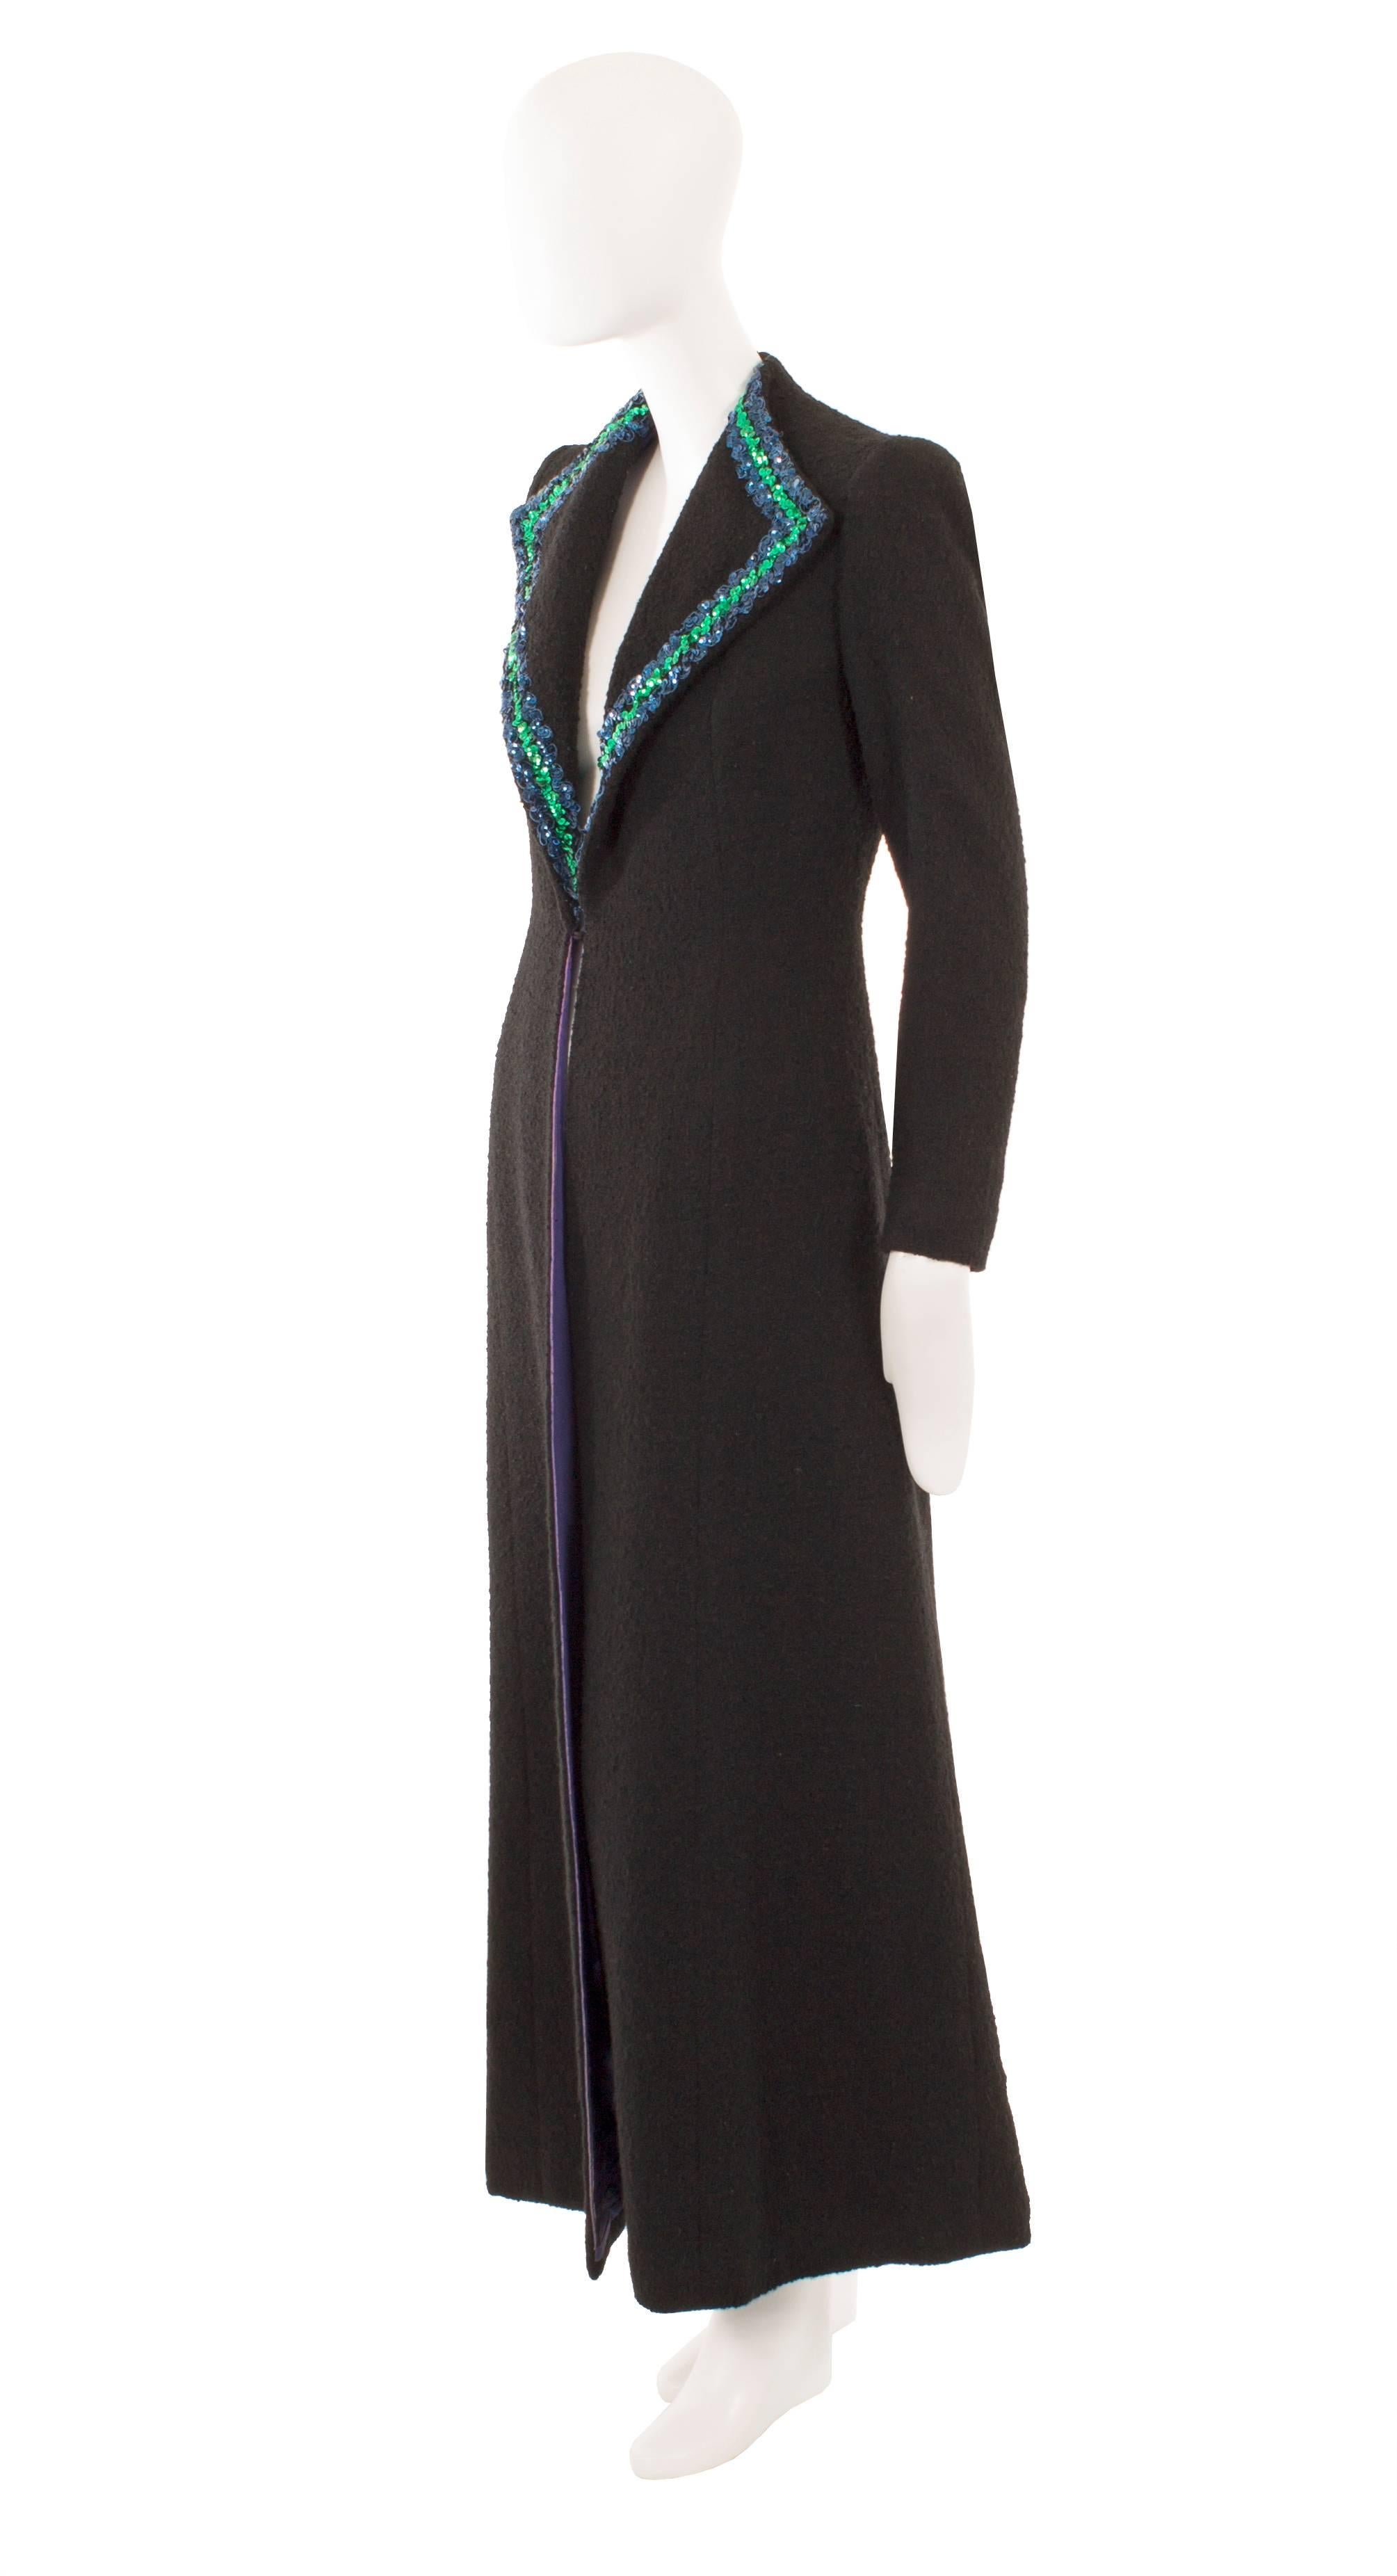 An incredibly rare piece of Schiaparelli haute couture, this coat is a fantastic piece of fashion history! Constructed from black Linton wool, the coat is sharply tailored with a double lapel collar embellished with blue and green sequins. A single